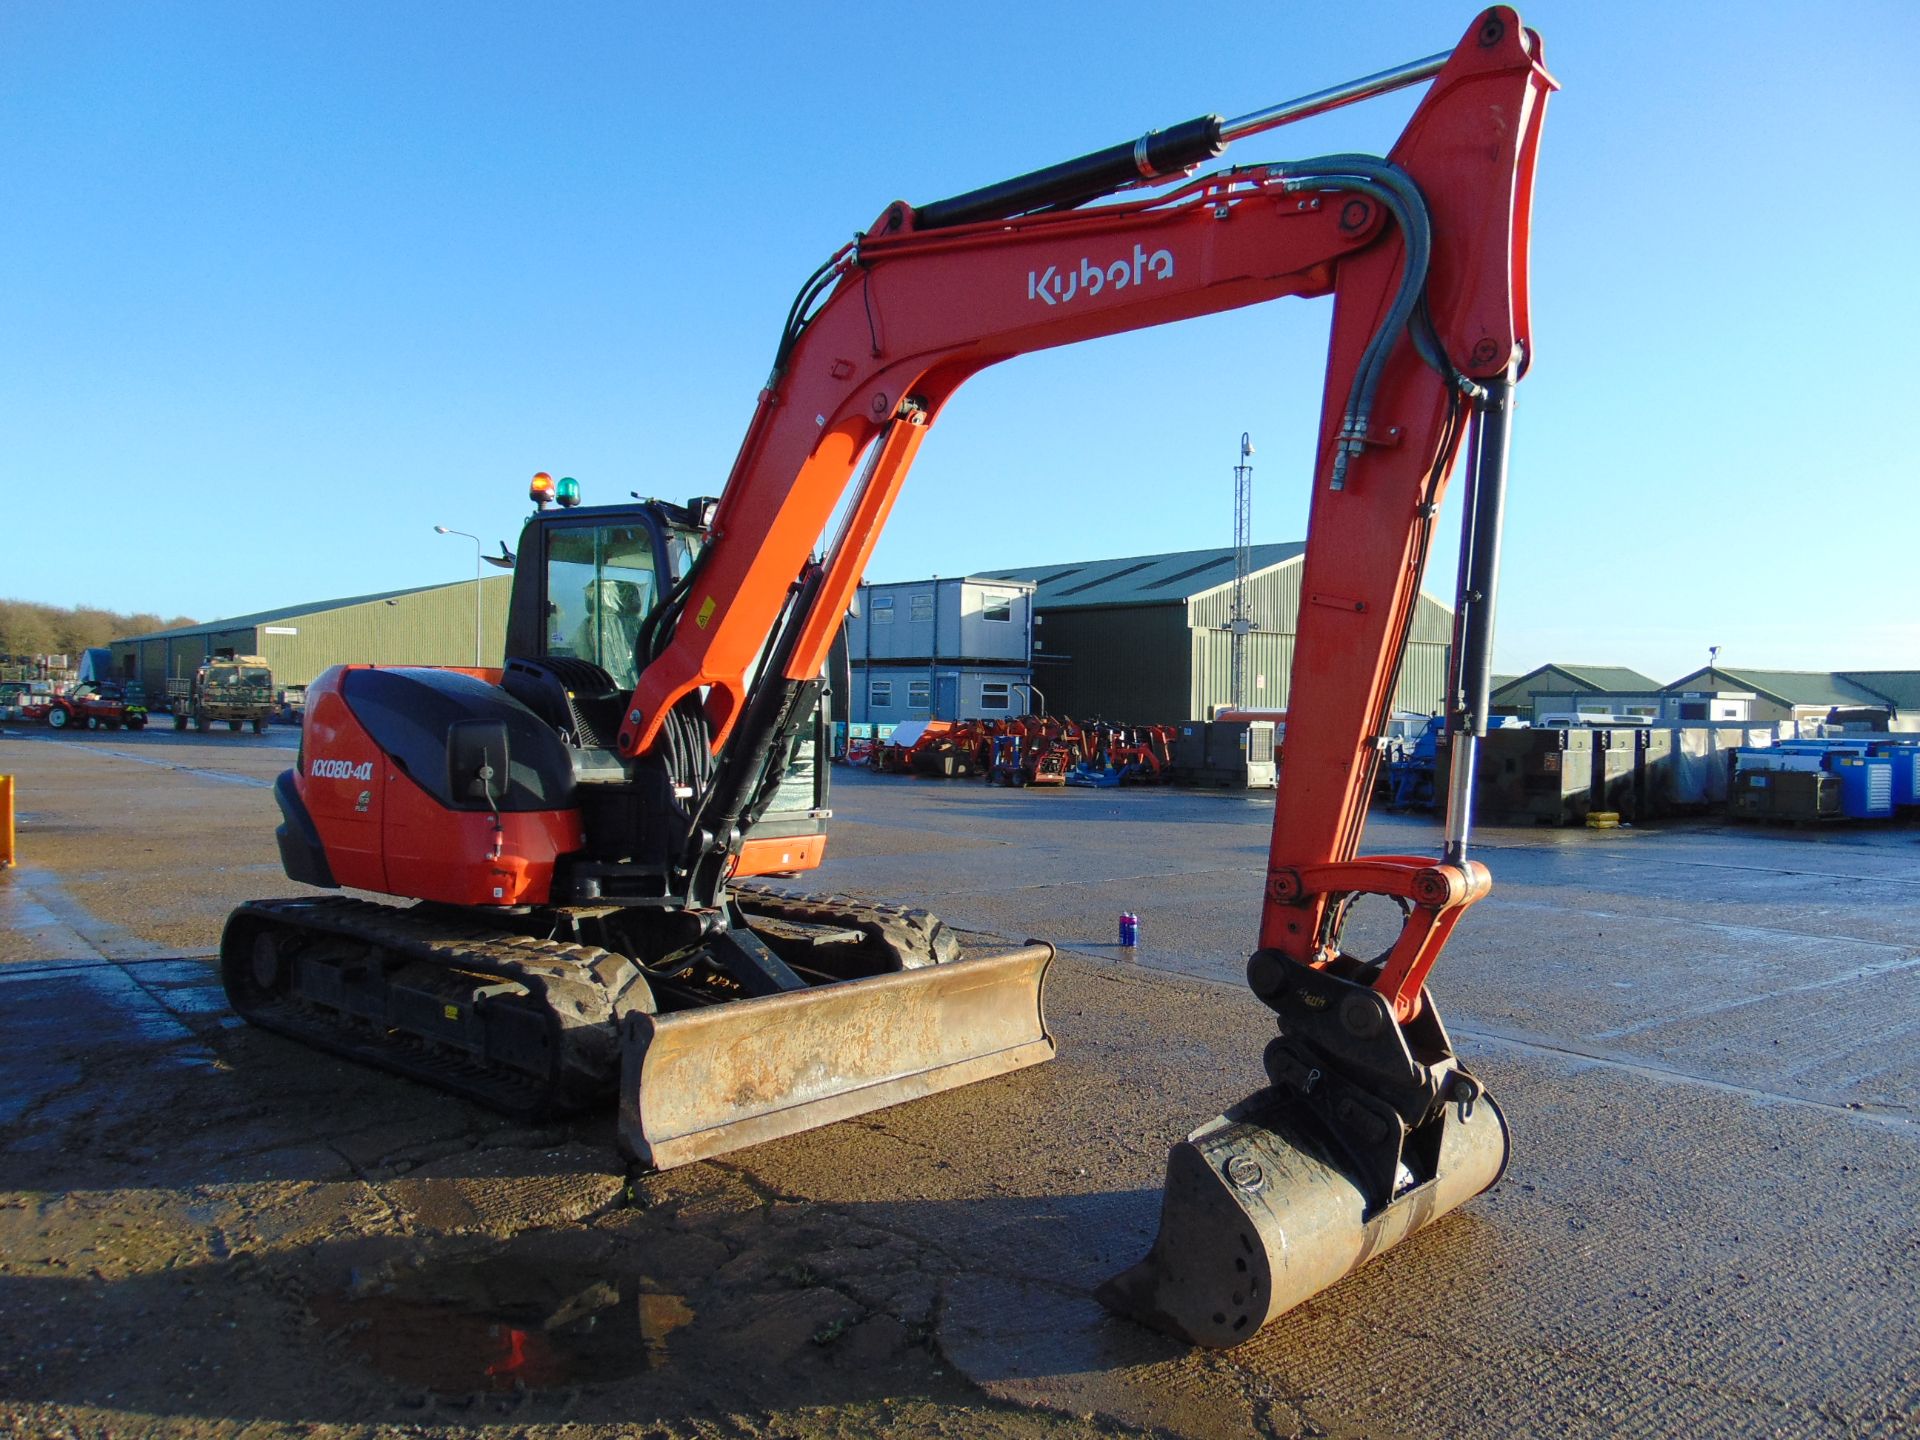 2017 KUBOTA KX 080-4A Excavator 1212 Hrs Only Very High Specification with 3 Buckets Sno 42470 - Bild 3 aus 25